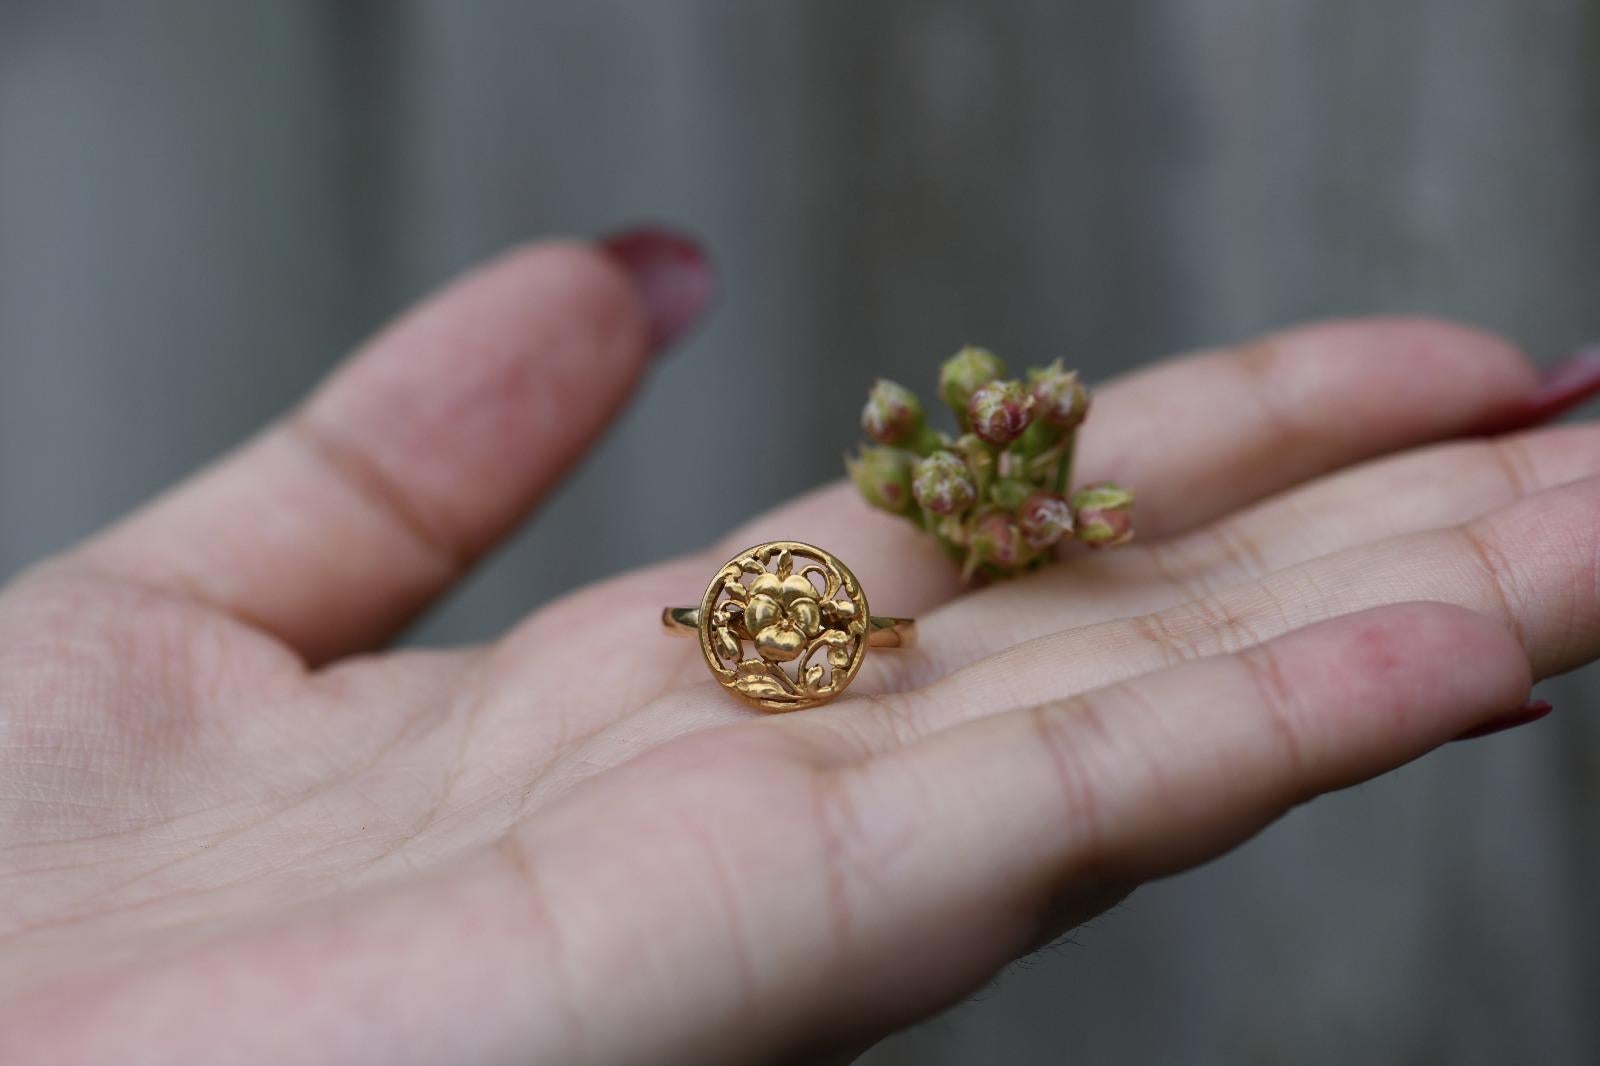 A graceful floral ring, inspired by the Art Nouveau period. A delicately feminine design, enchanting with twists and twines of flowers and leaves.

Designed within a circle, enclosing leaves and vines twisting amongst one another. The contrast of